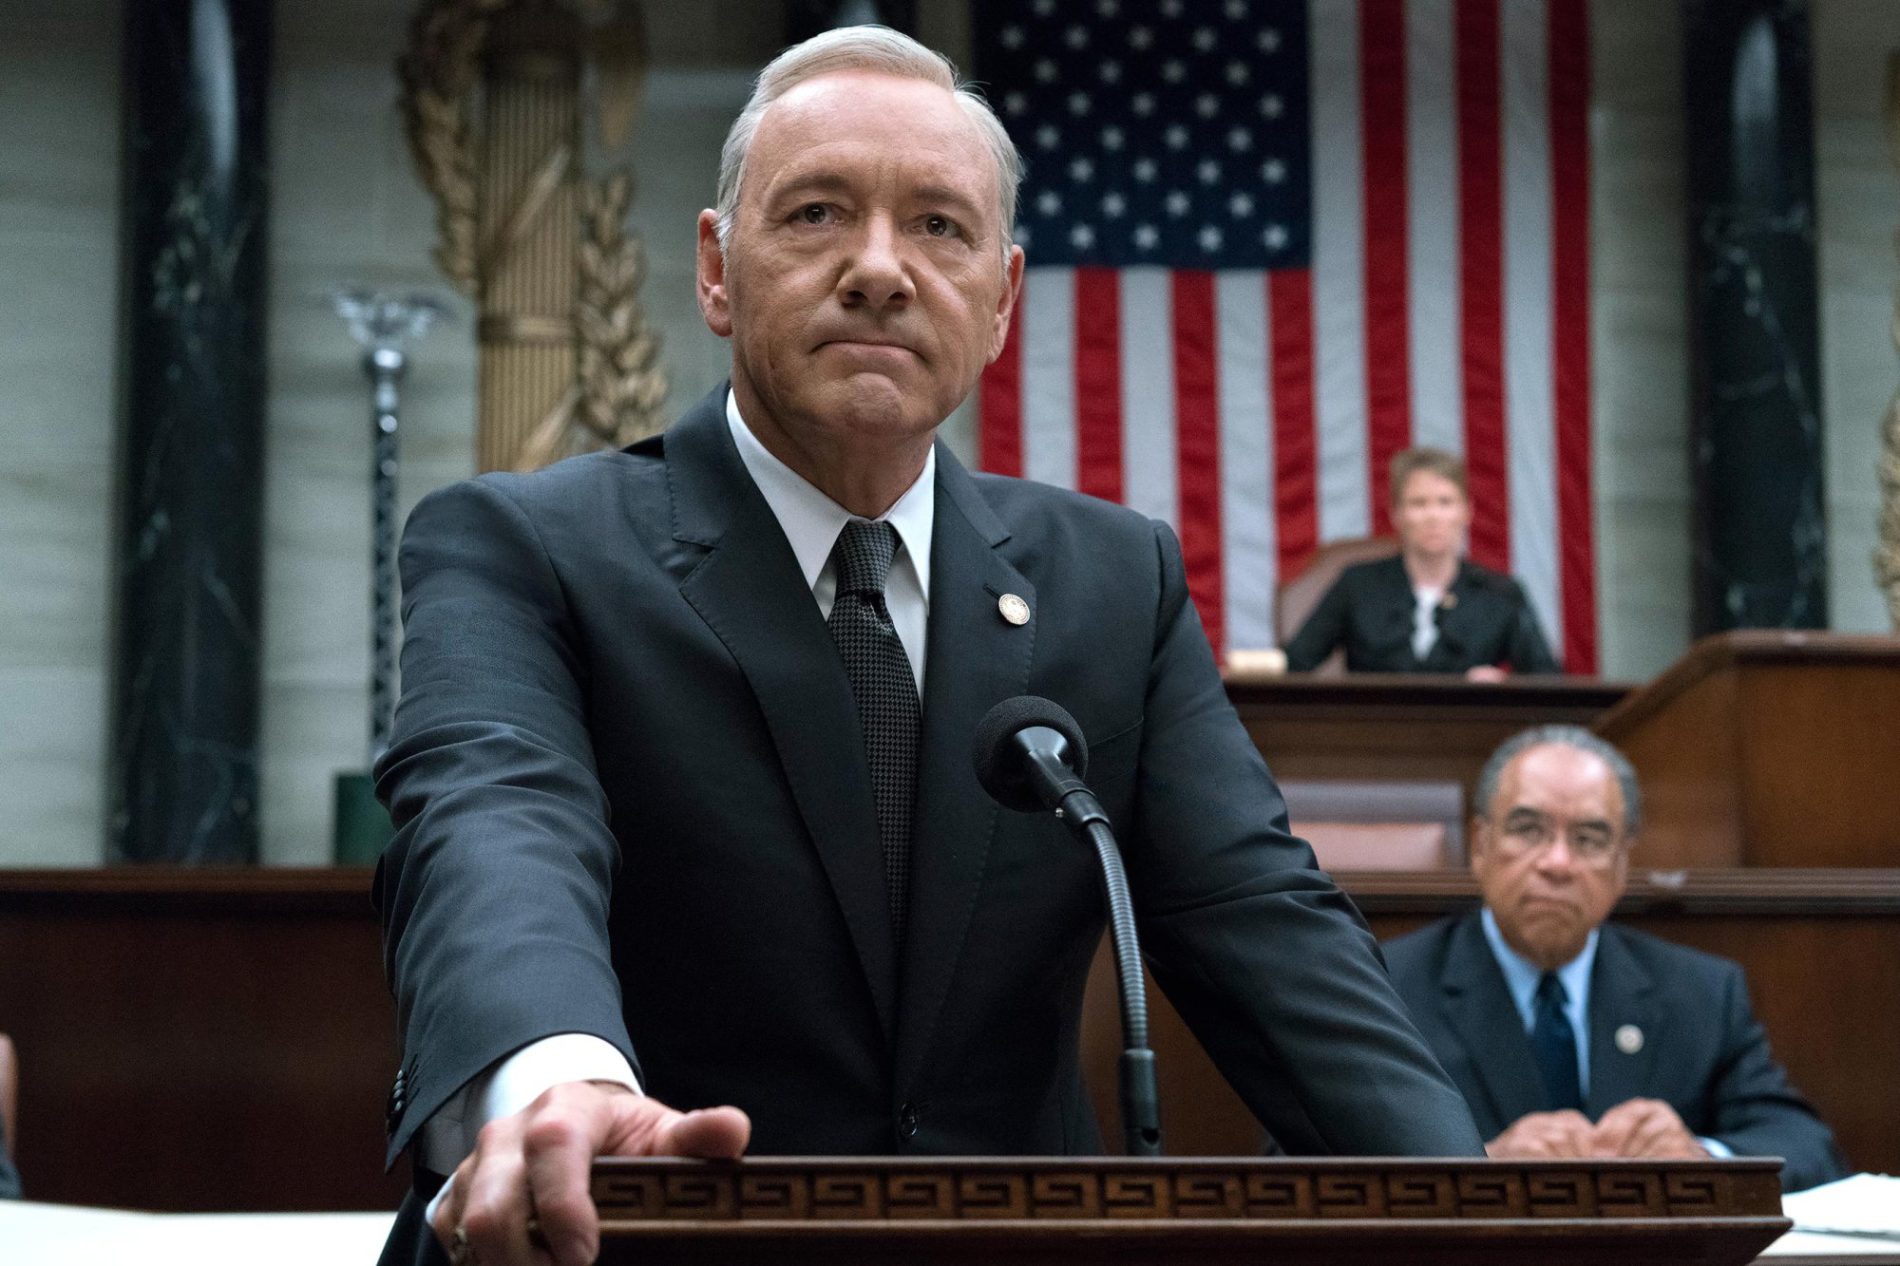 Netflix confirms that ‘House of Cards’ will end with season 6, a day after star Kevin Spacey was accused of sexual misconduct